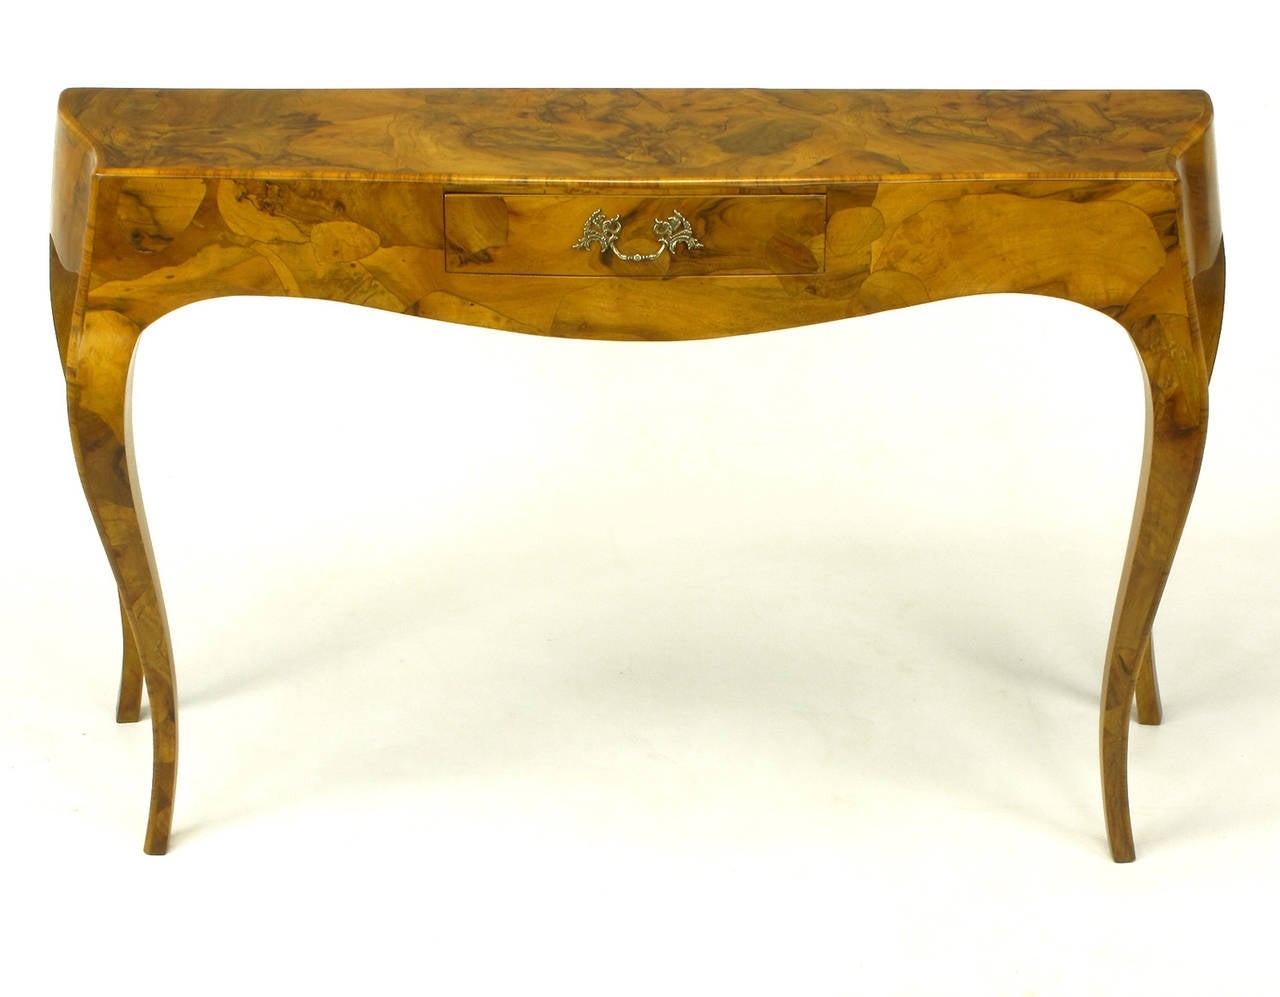 Mid-20th Century Italian Walnut Oyster Burl Bombe Console Table with Cabriole Legs